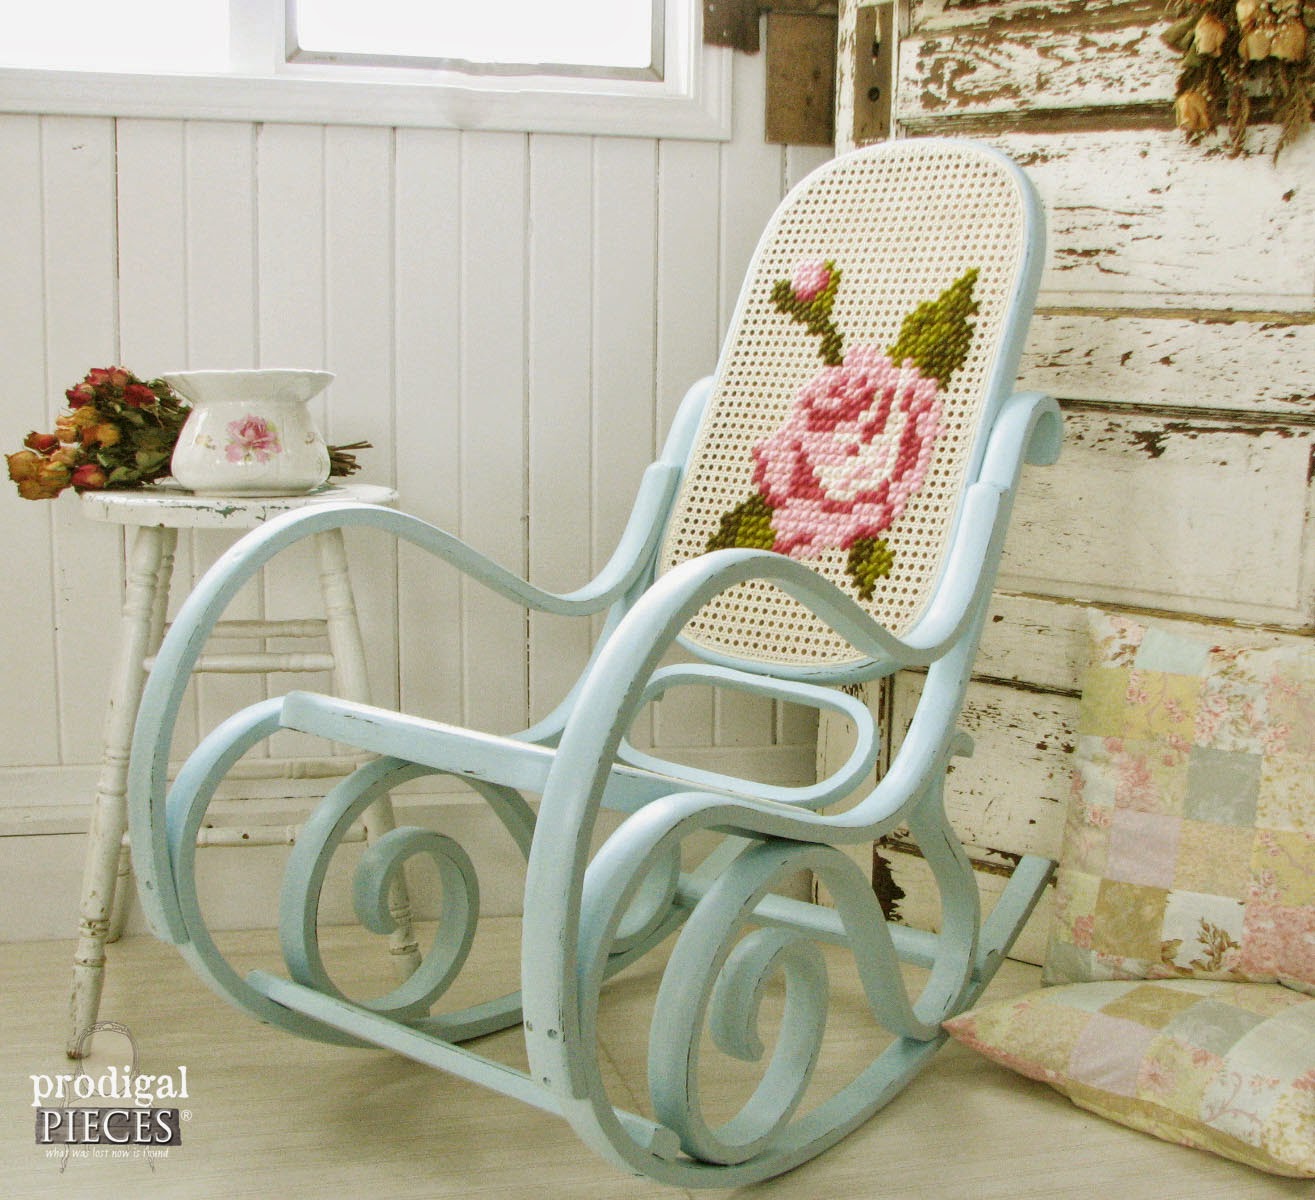 Antique Vintage Bentwood Rocking Chair Gets an Aqua Blue Facelift with Shabby Chic Crosstitch by Prodigal Pieces | prodigalpieces.com